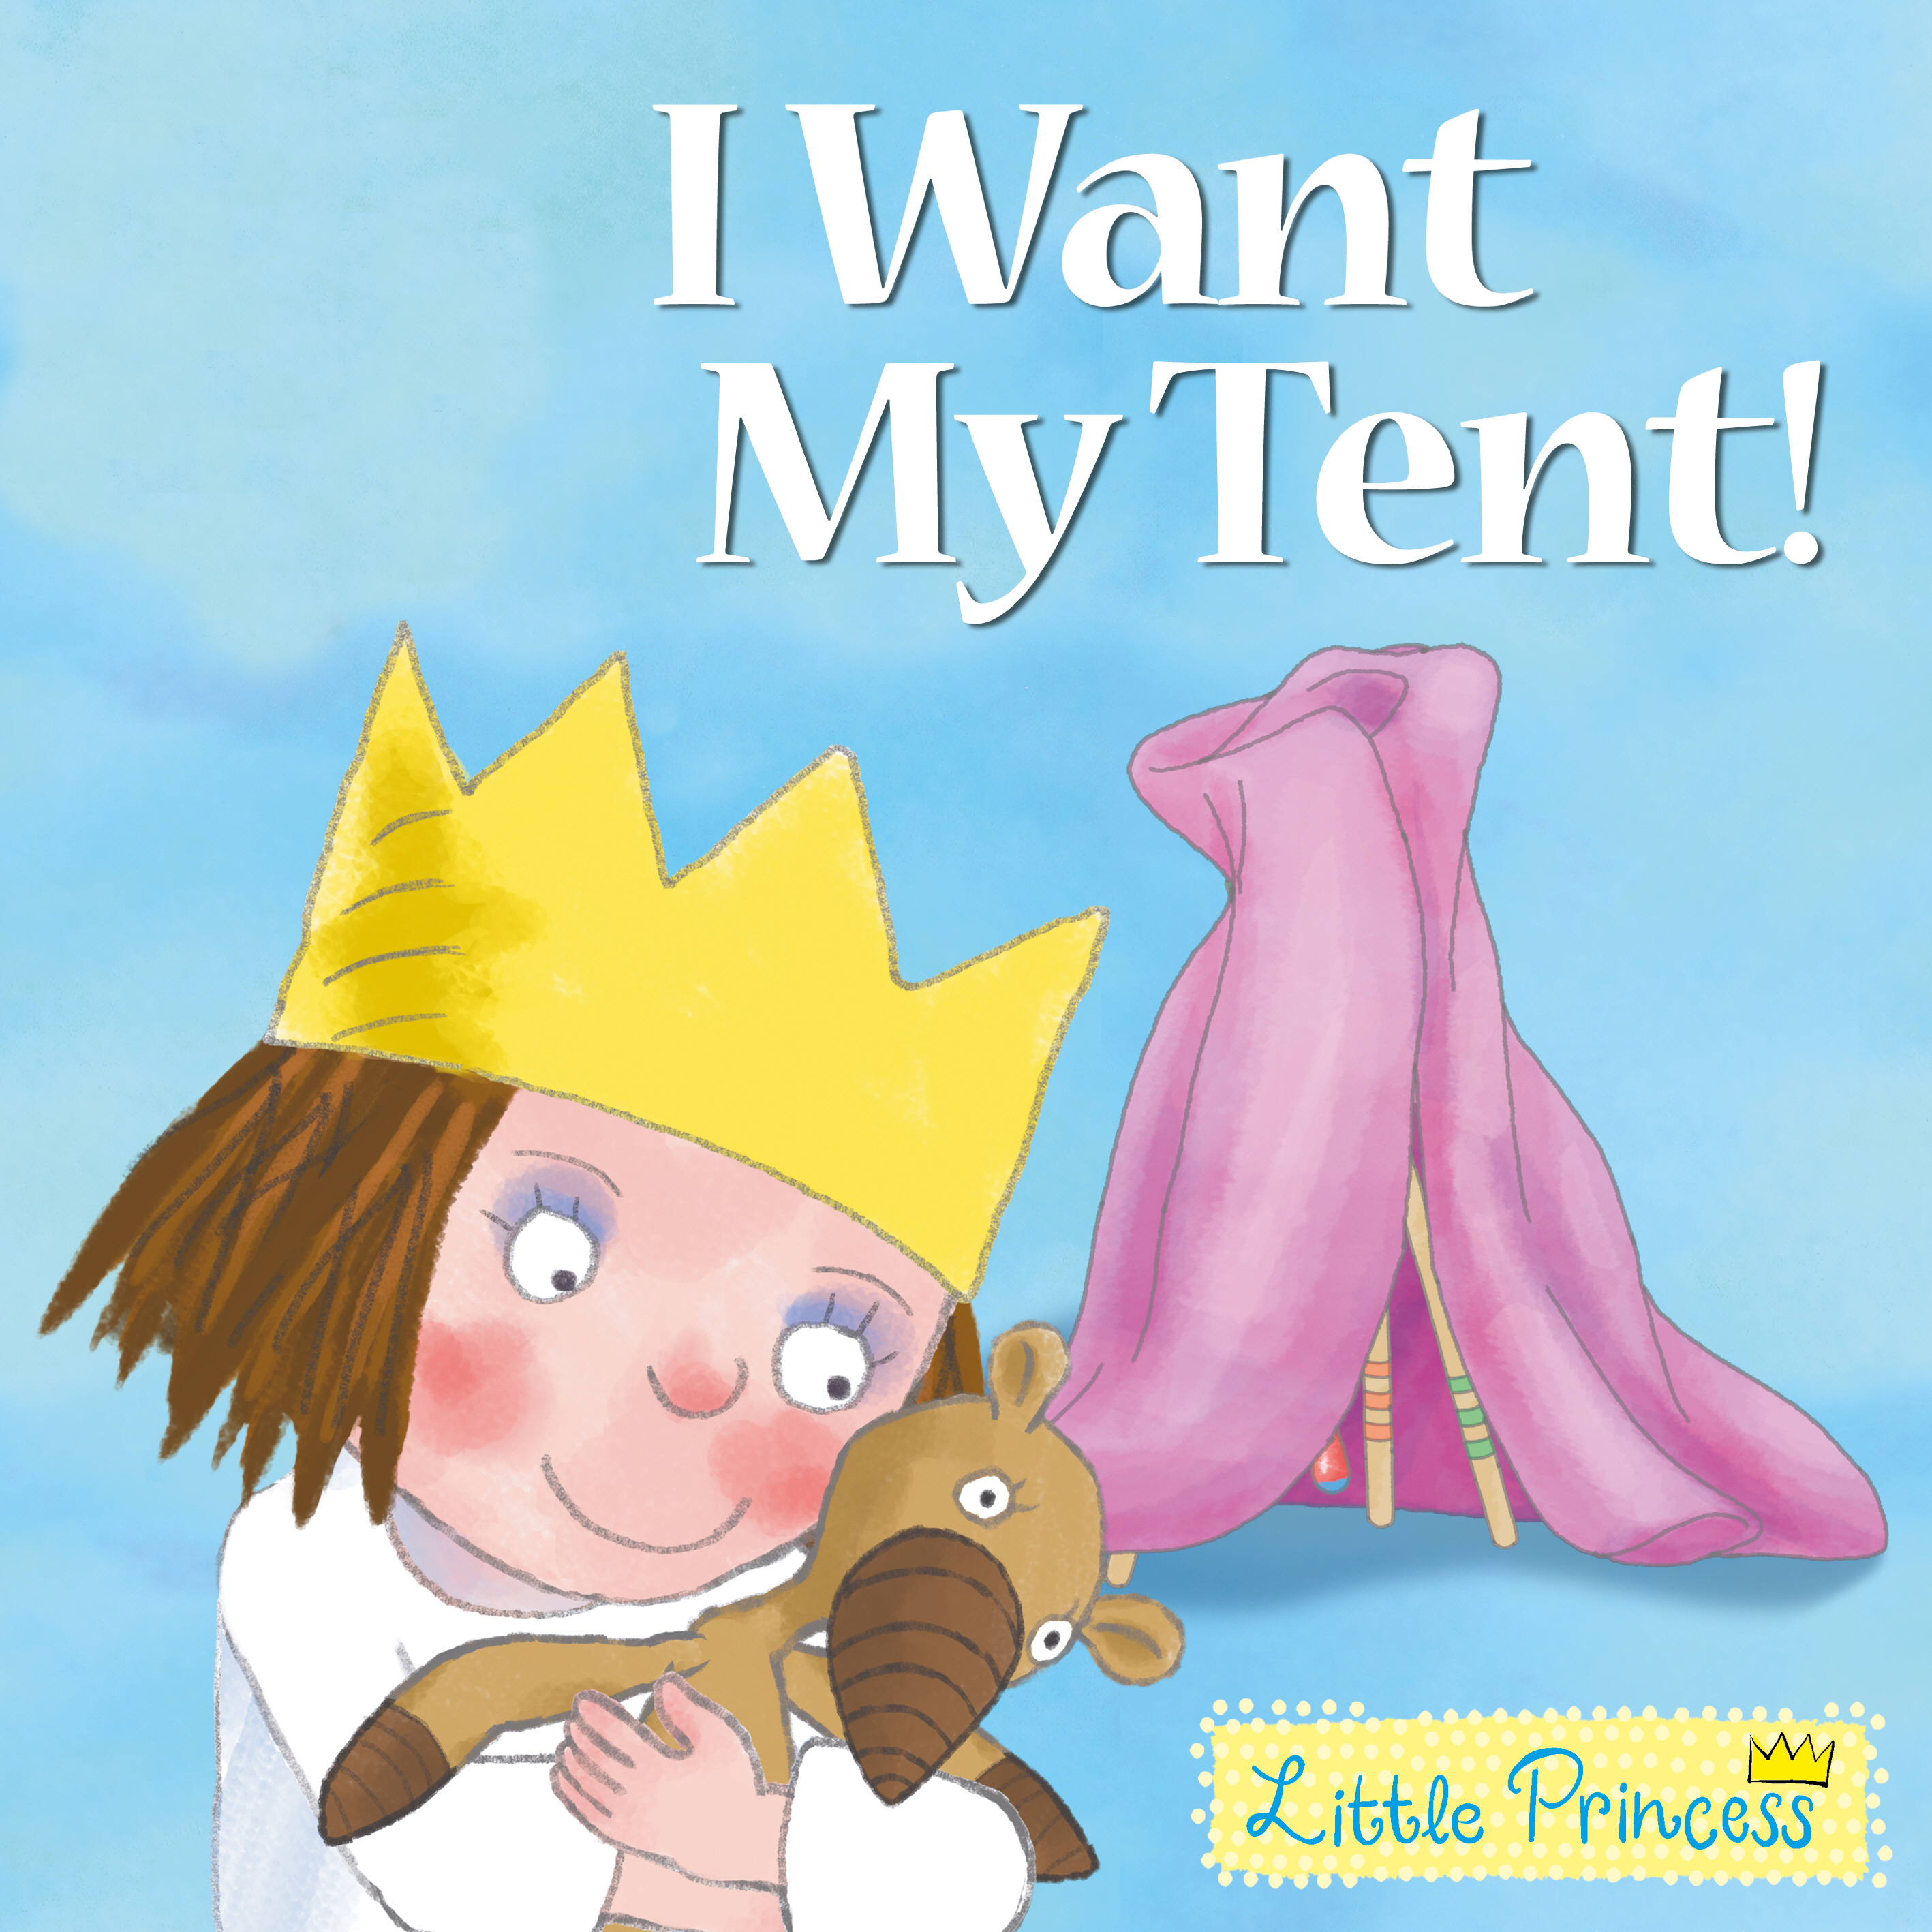 I Want My Tent!